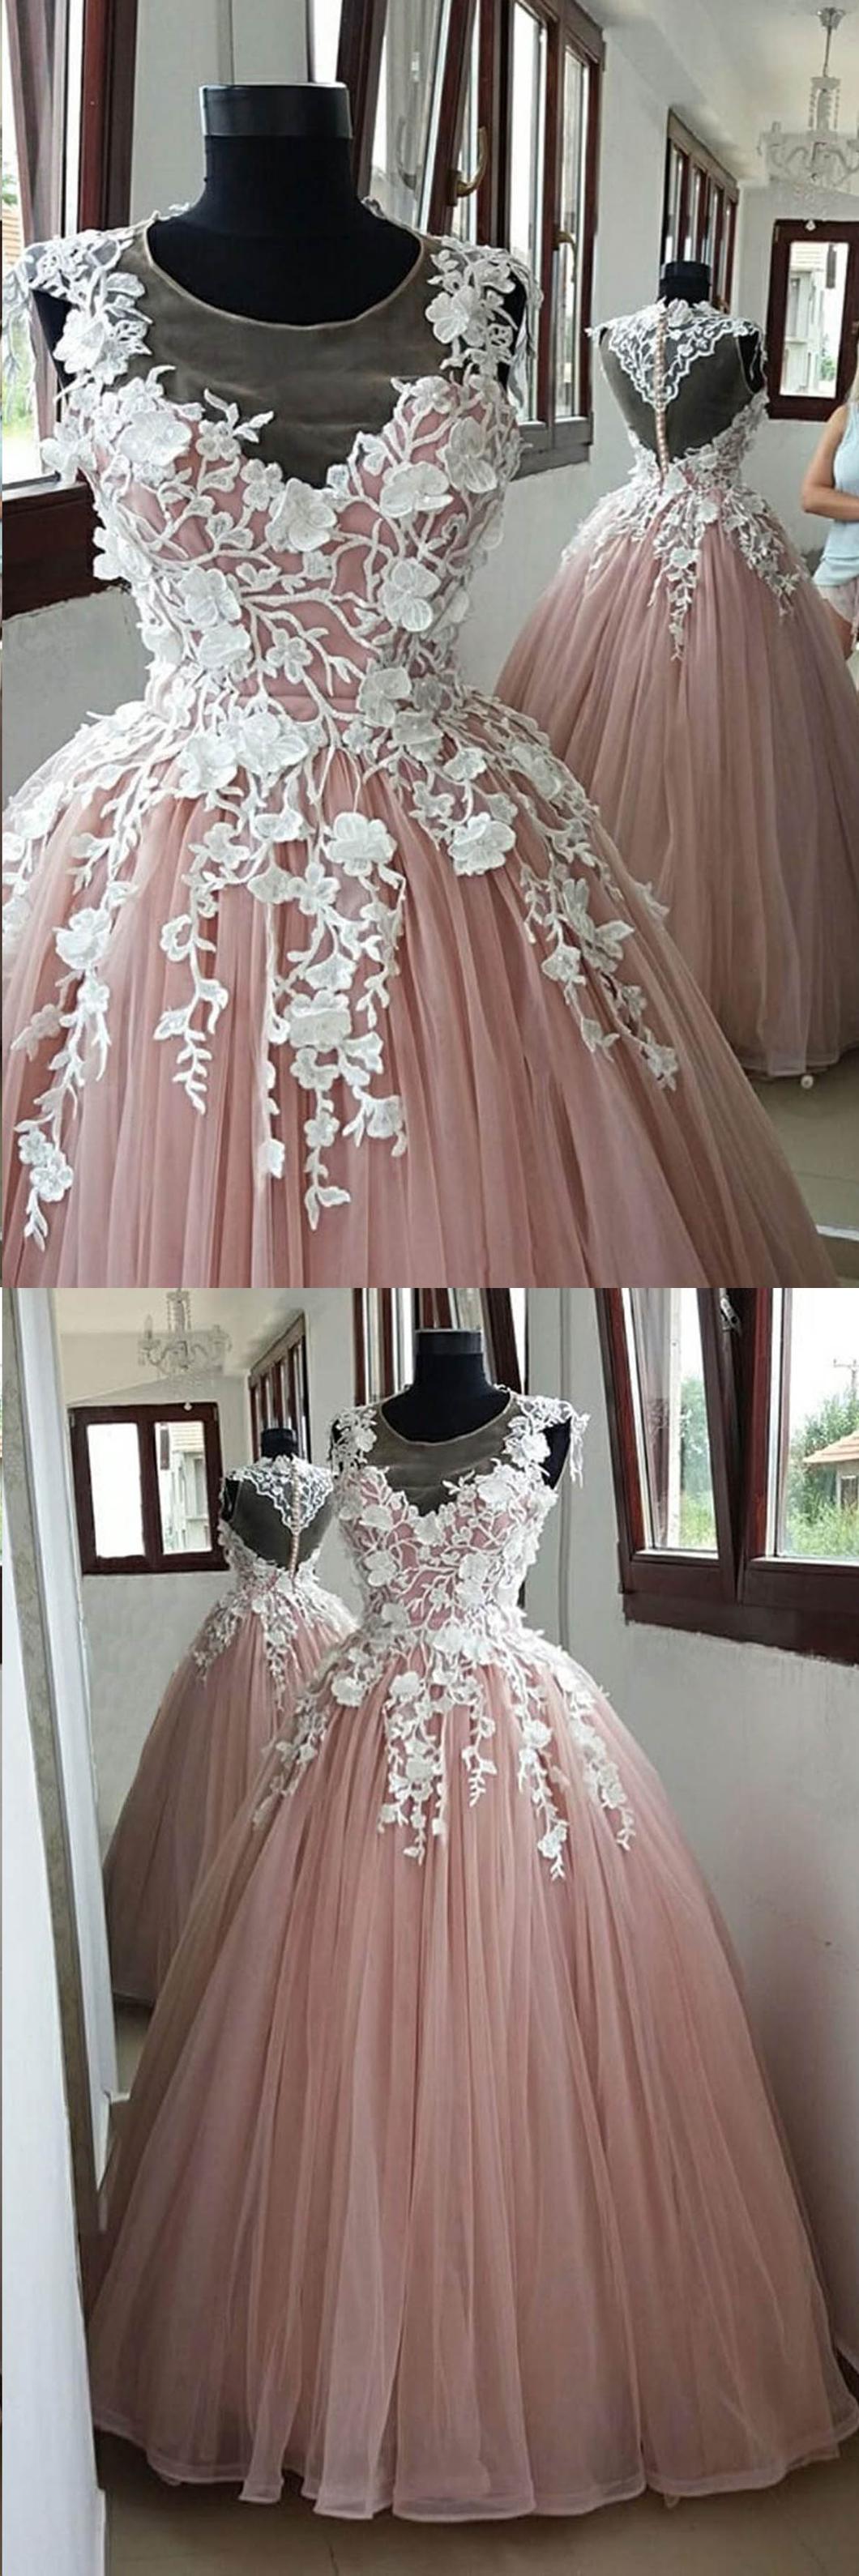 Ball Gown Pink Prom Dress Tulle A Line Plus Size Long Prom Dress #ER433 - OrtDress